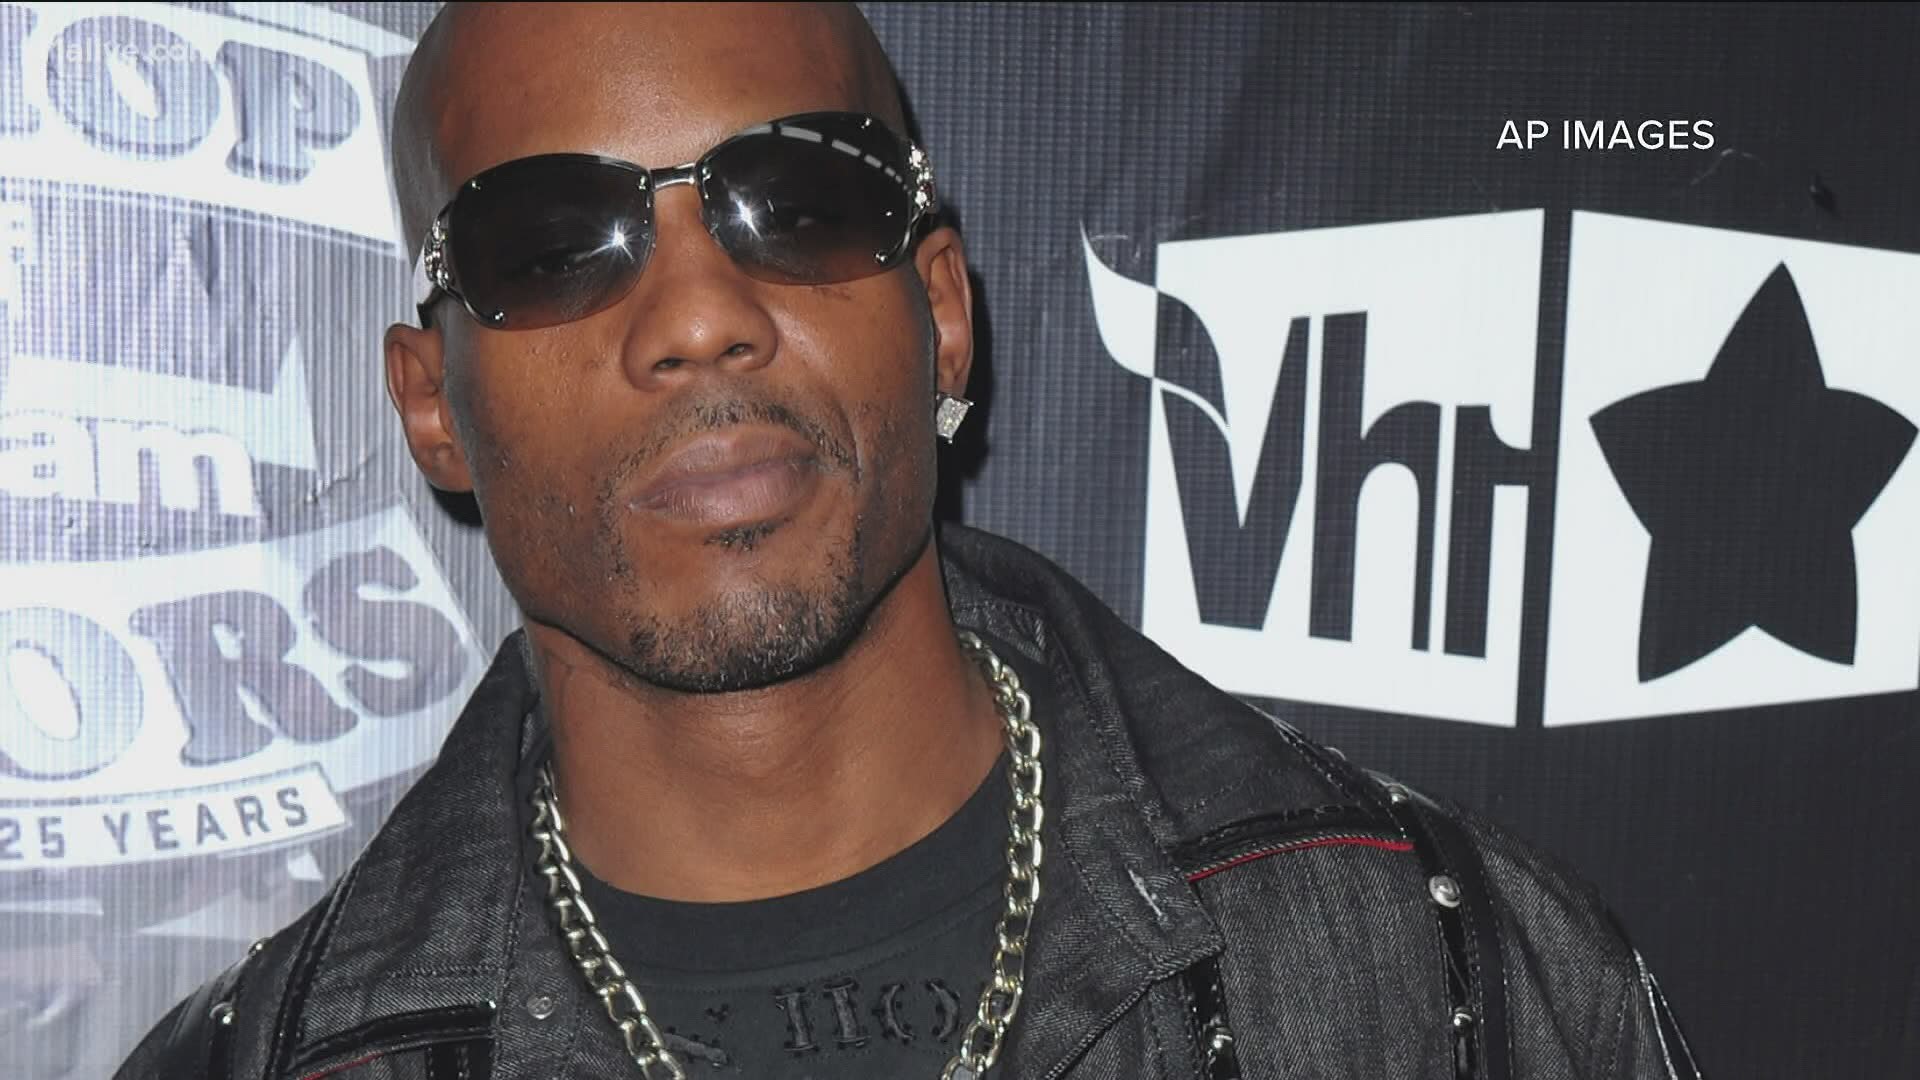 Despite rumors of his death, DMX's manager said the legendary rapper is alive and on life support.